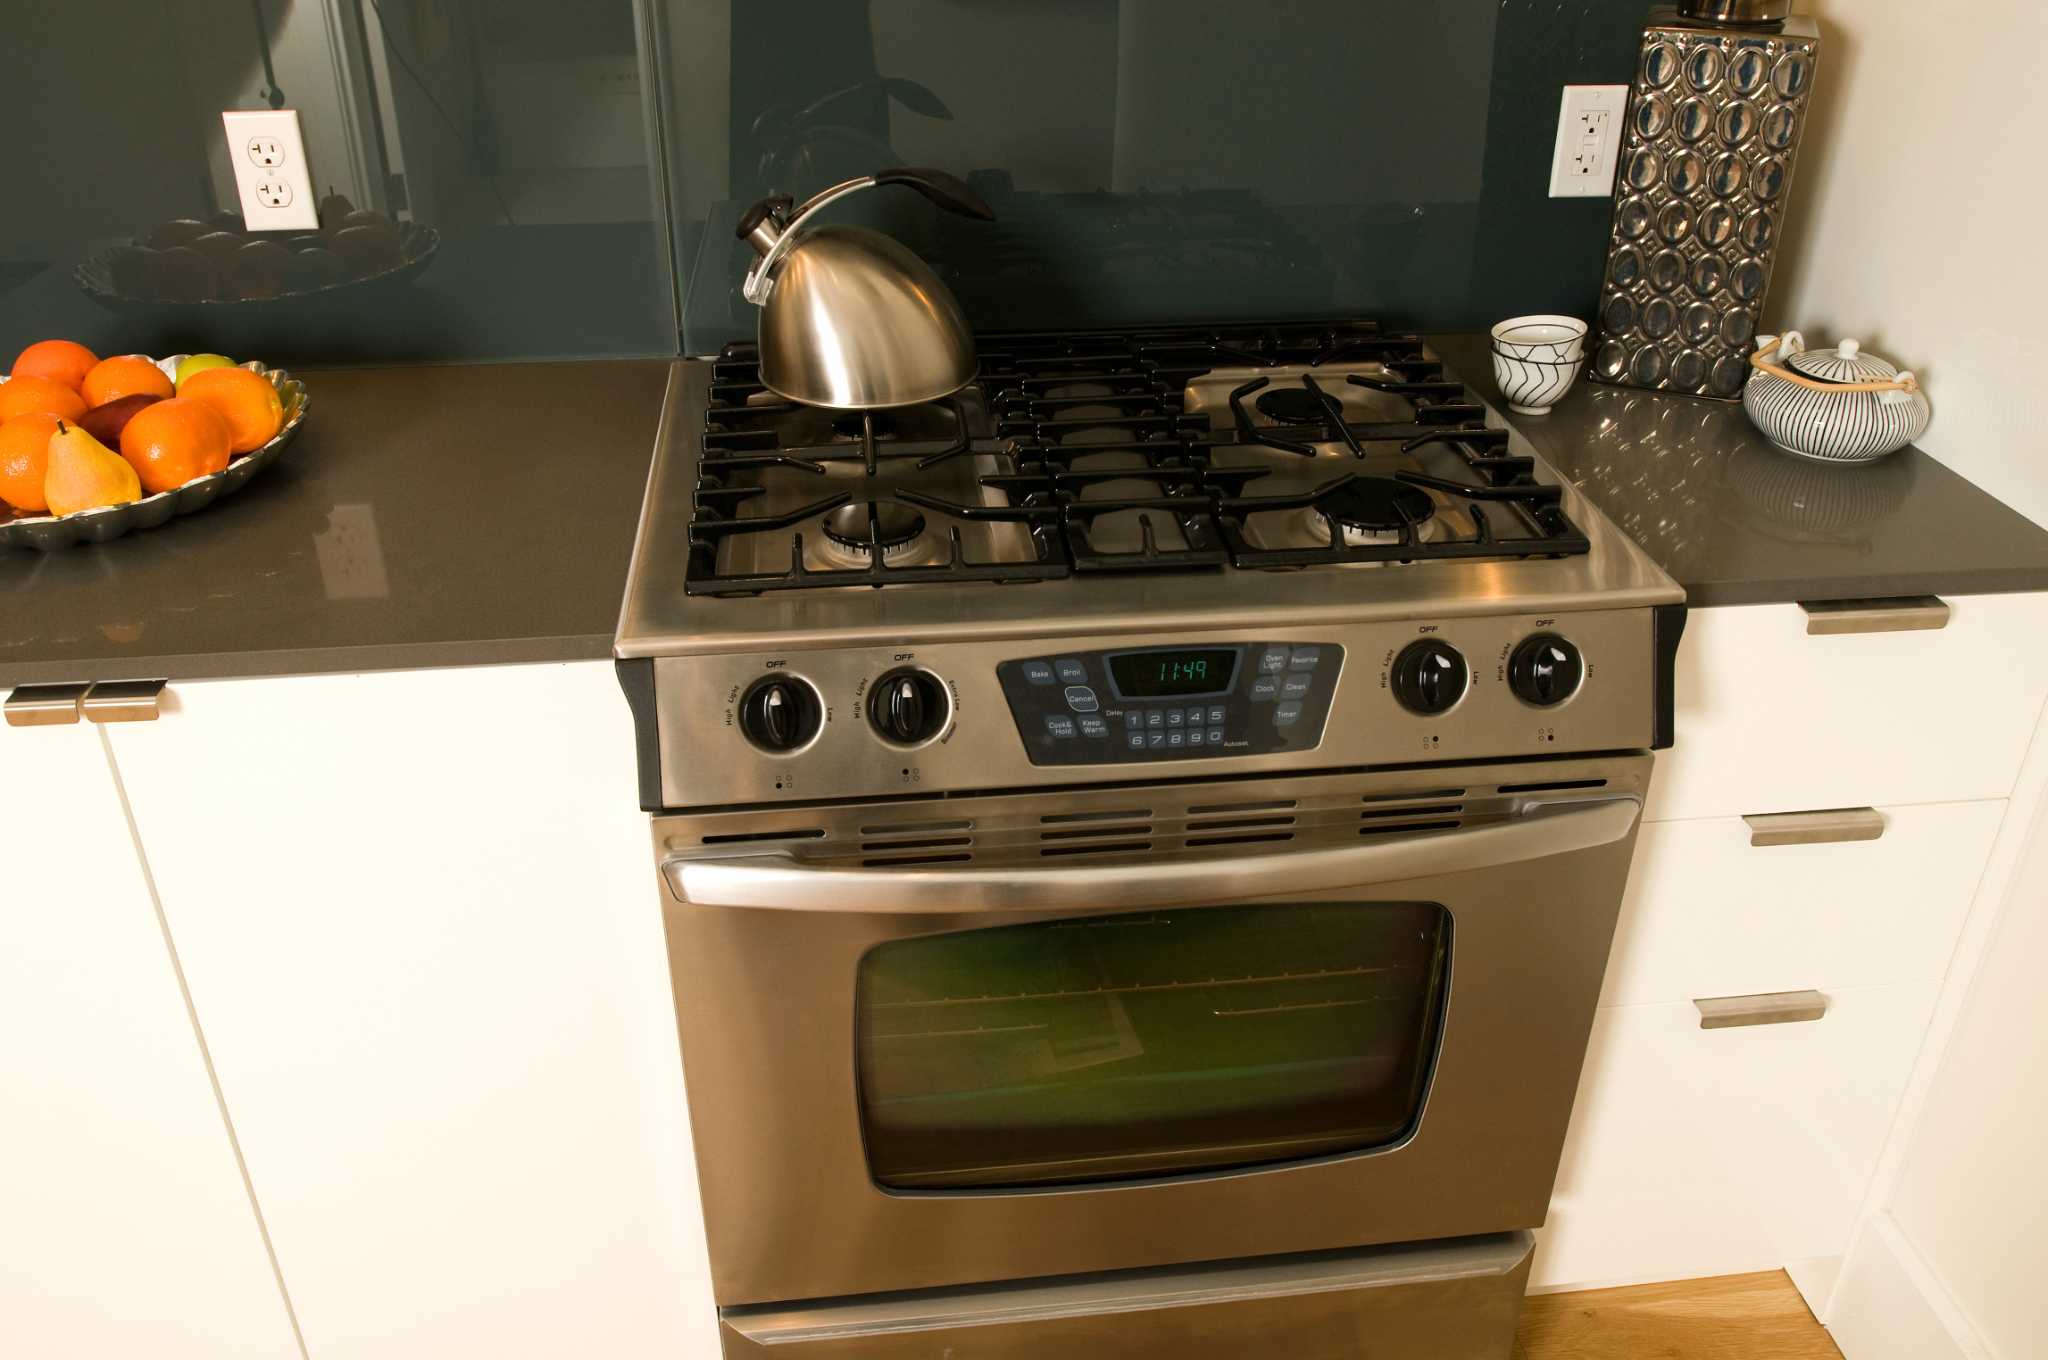 How to Fix a Door That Won't Lock on a Self-Cleaning Oven